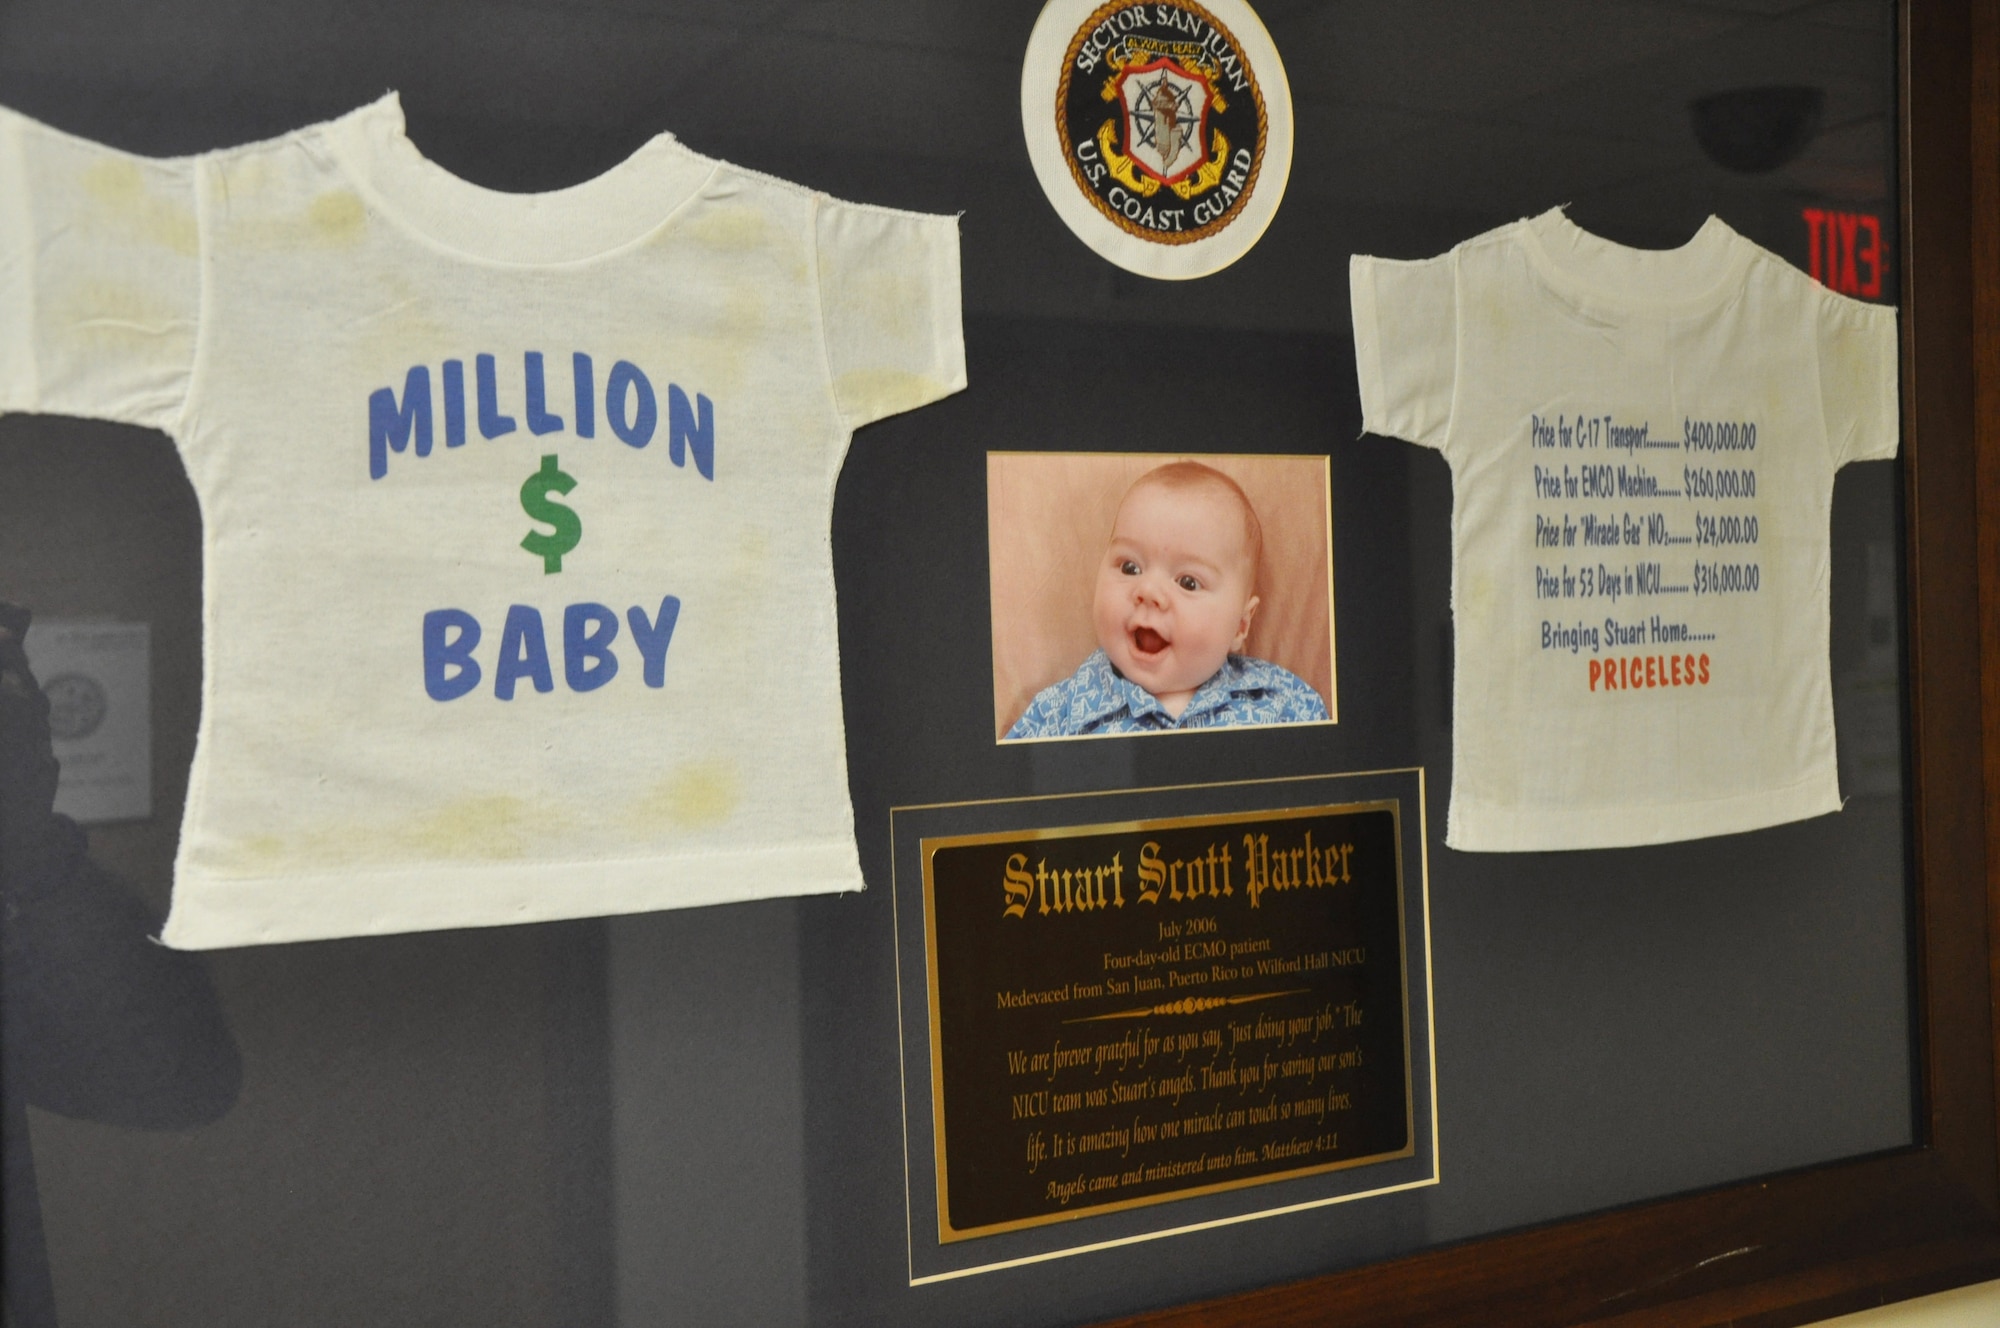 The walls of San Antonio Military Medical Center's Neonatal Intensive Care Unit are lined with plaques and photos of babies who were treated at SAMMC and what is now Wilford Hall Ambulatory Surgical Center in San Antonio. All are gifts from grateful families. U.S. Army photo by Robert T. Shields